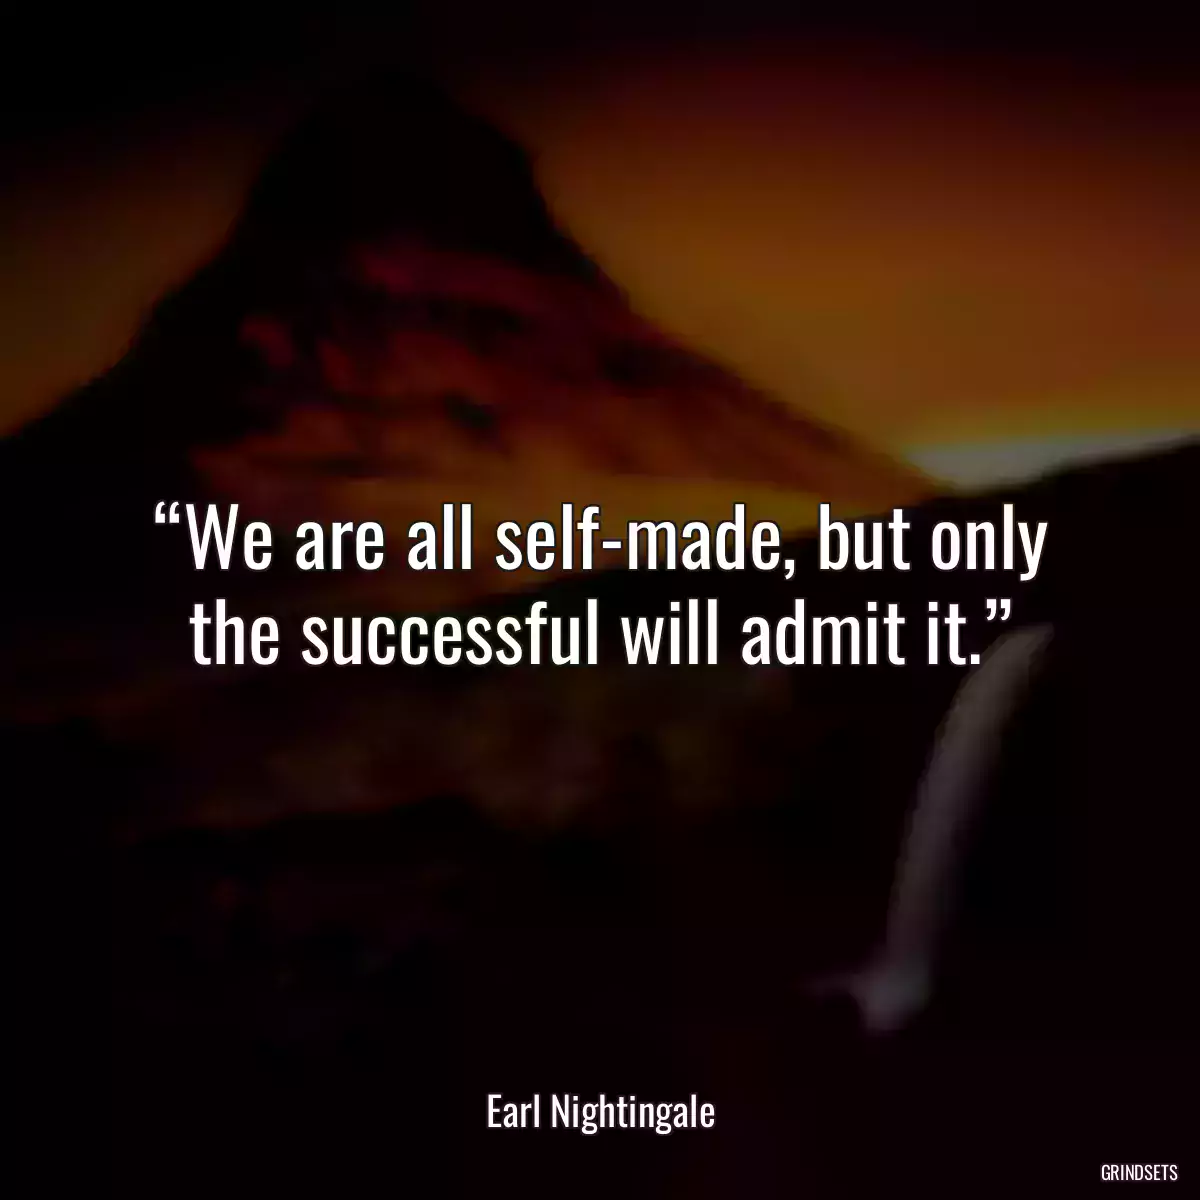 “We are all self-made, but only the successful will admit it.”